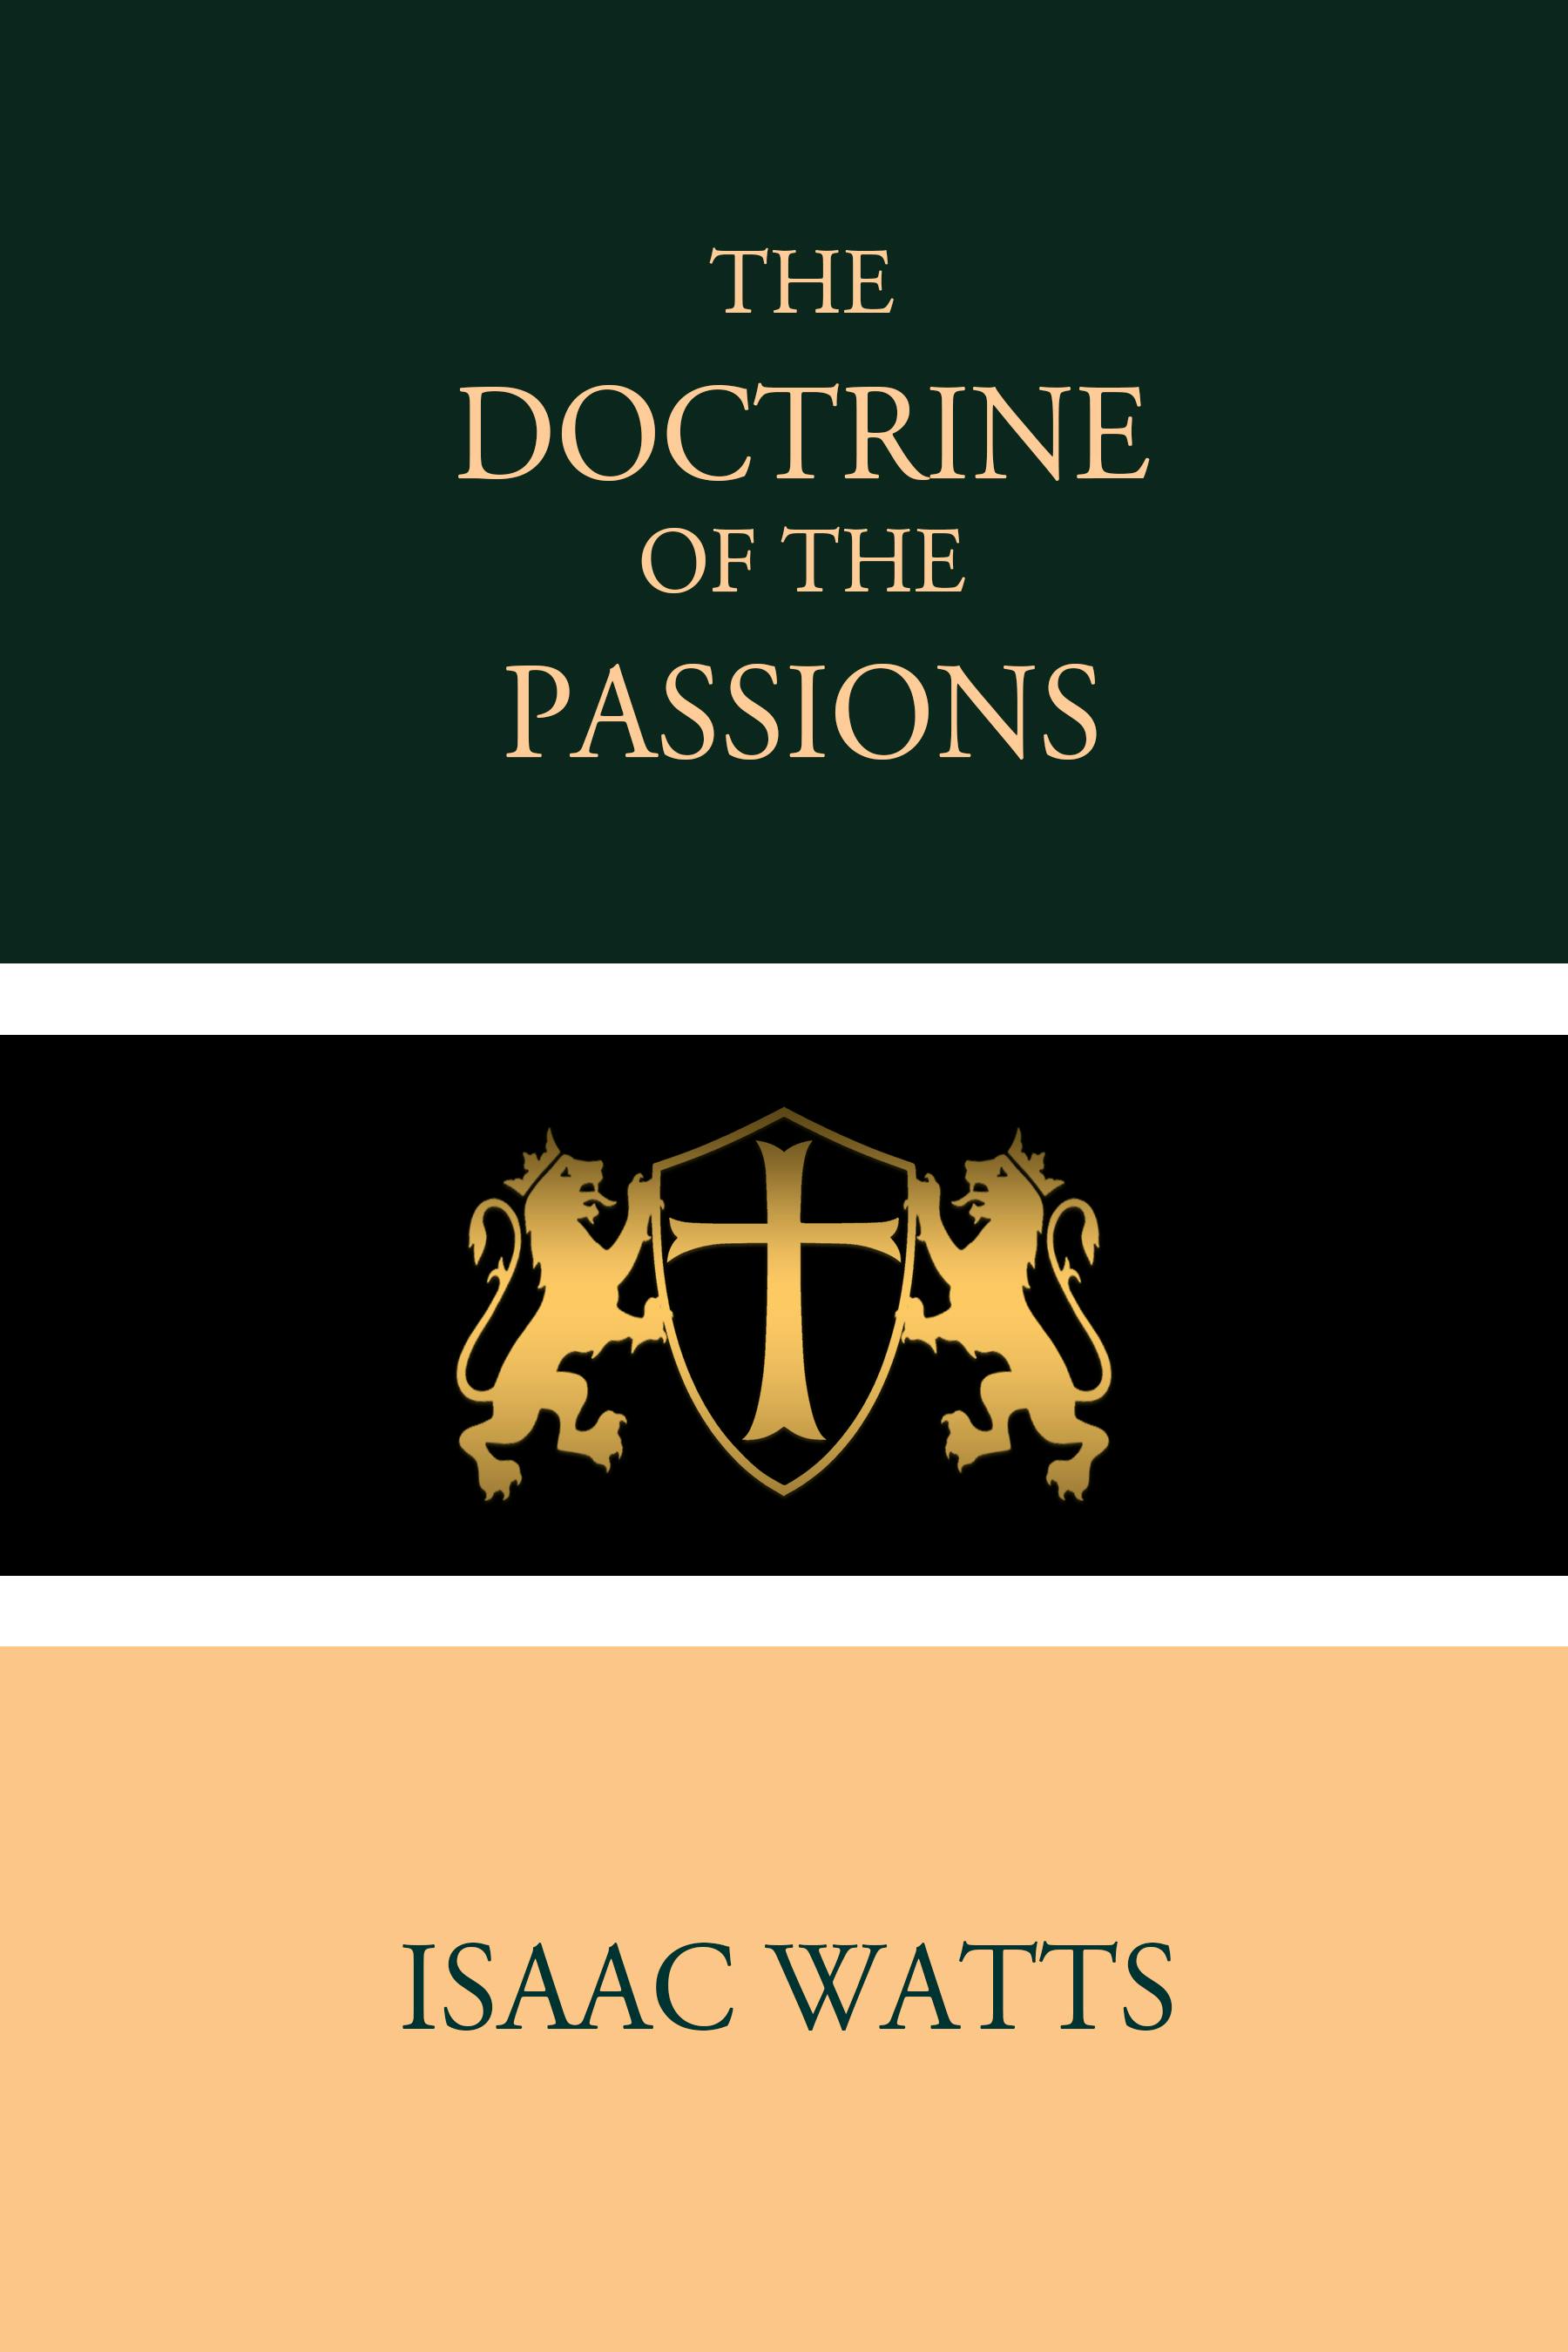 The Doctrine of the Passions - undefined